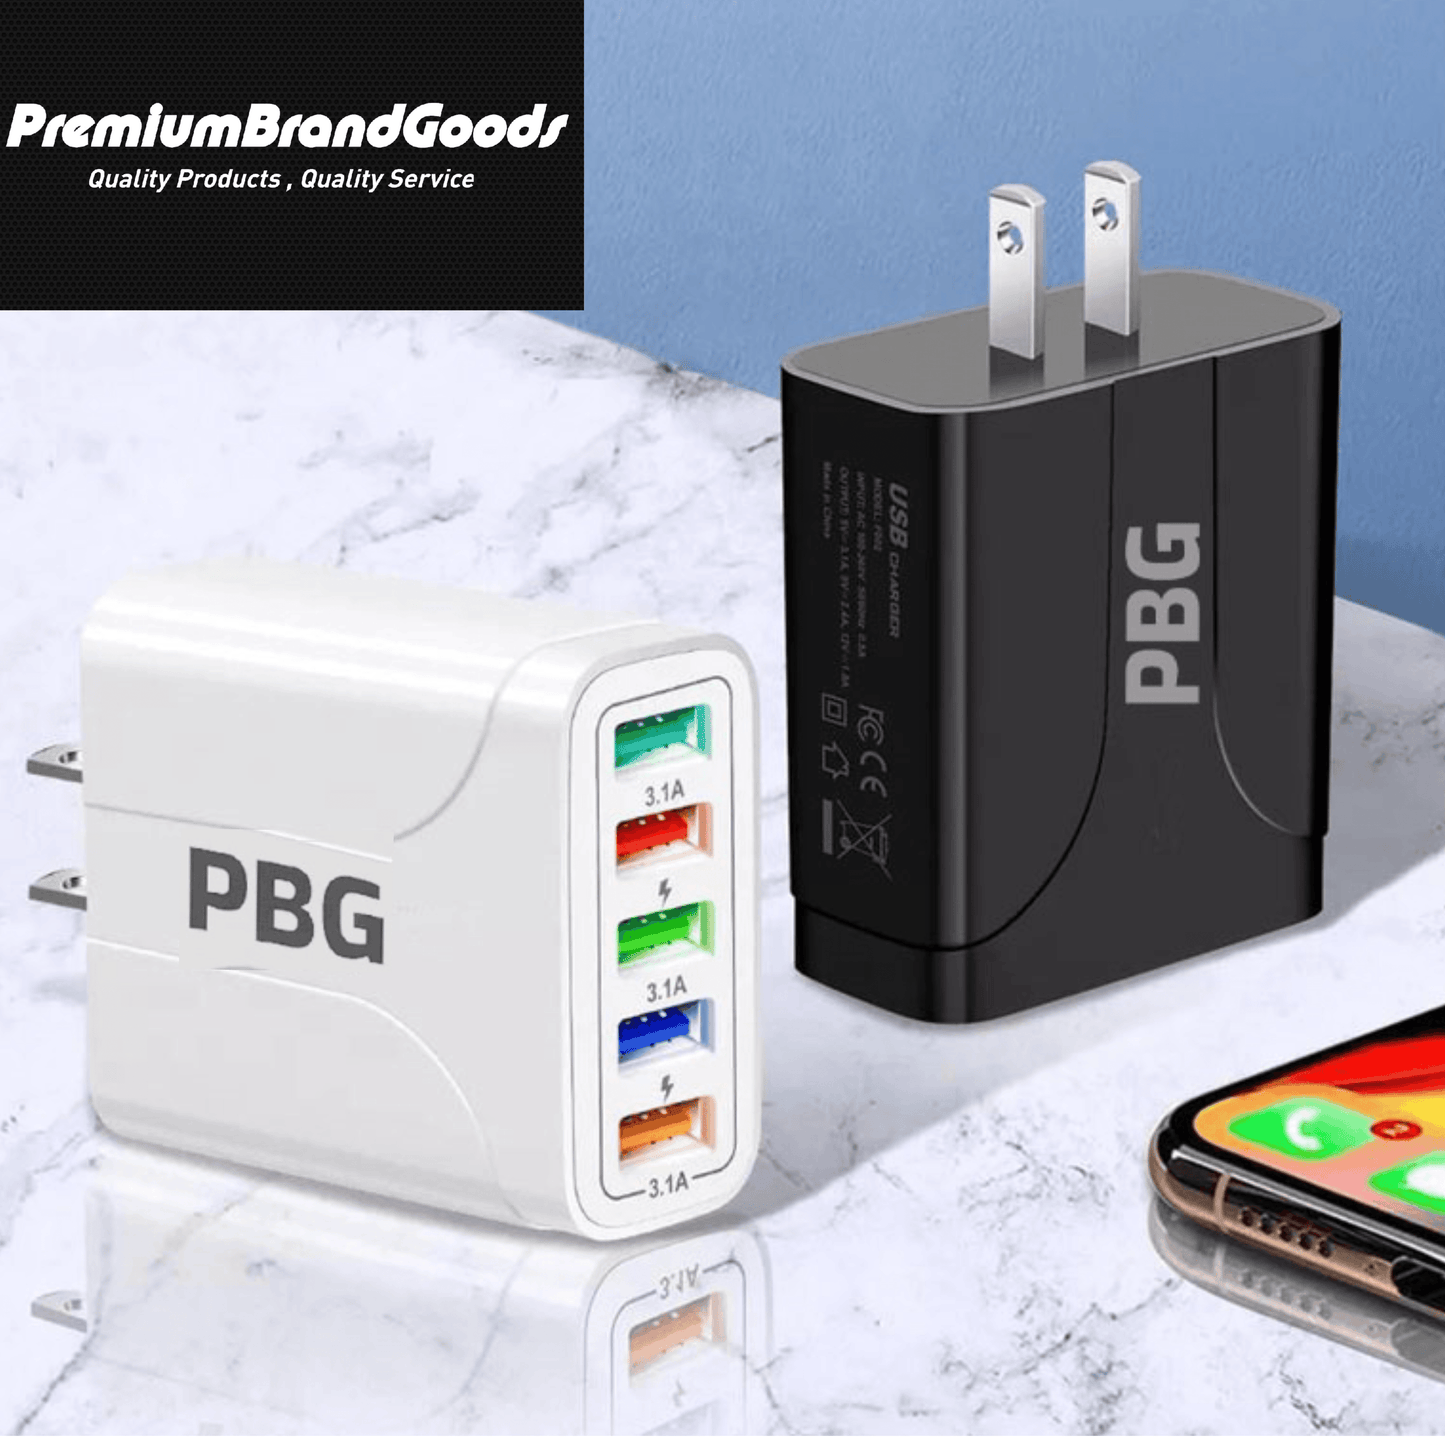 PBG White 5-Port LED Wall Charger & 3-in-1 Nylon Braided Fast Charging